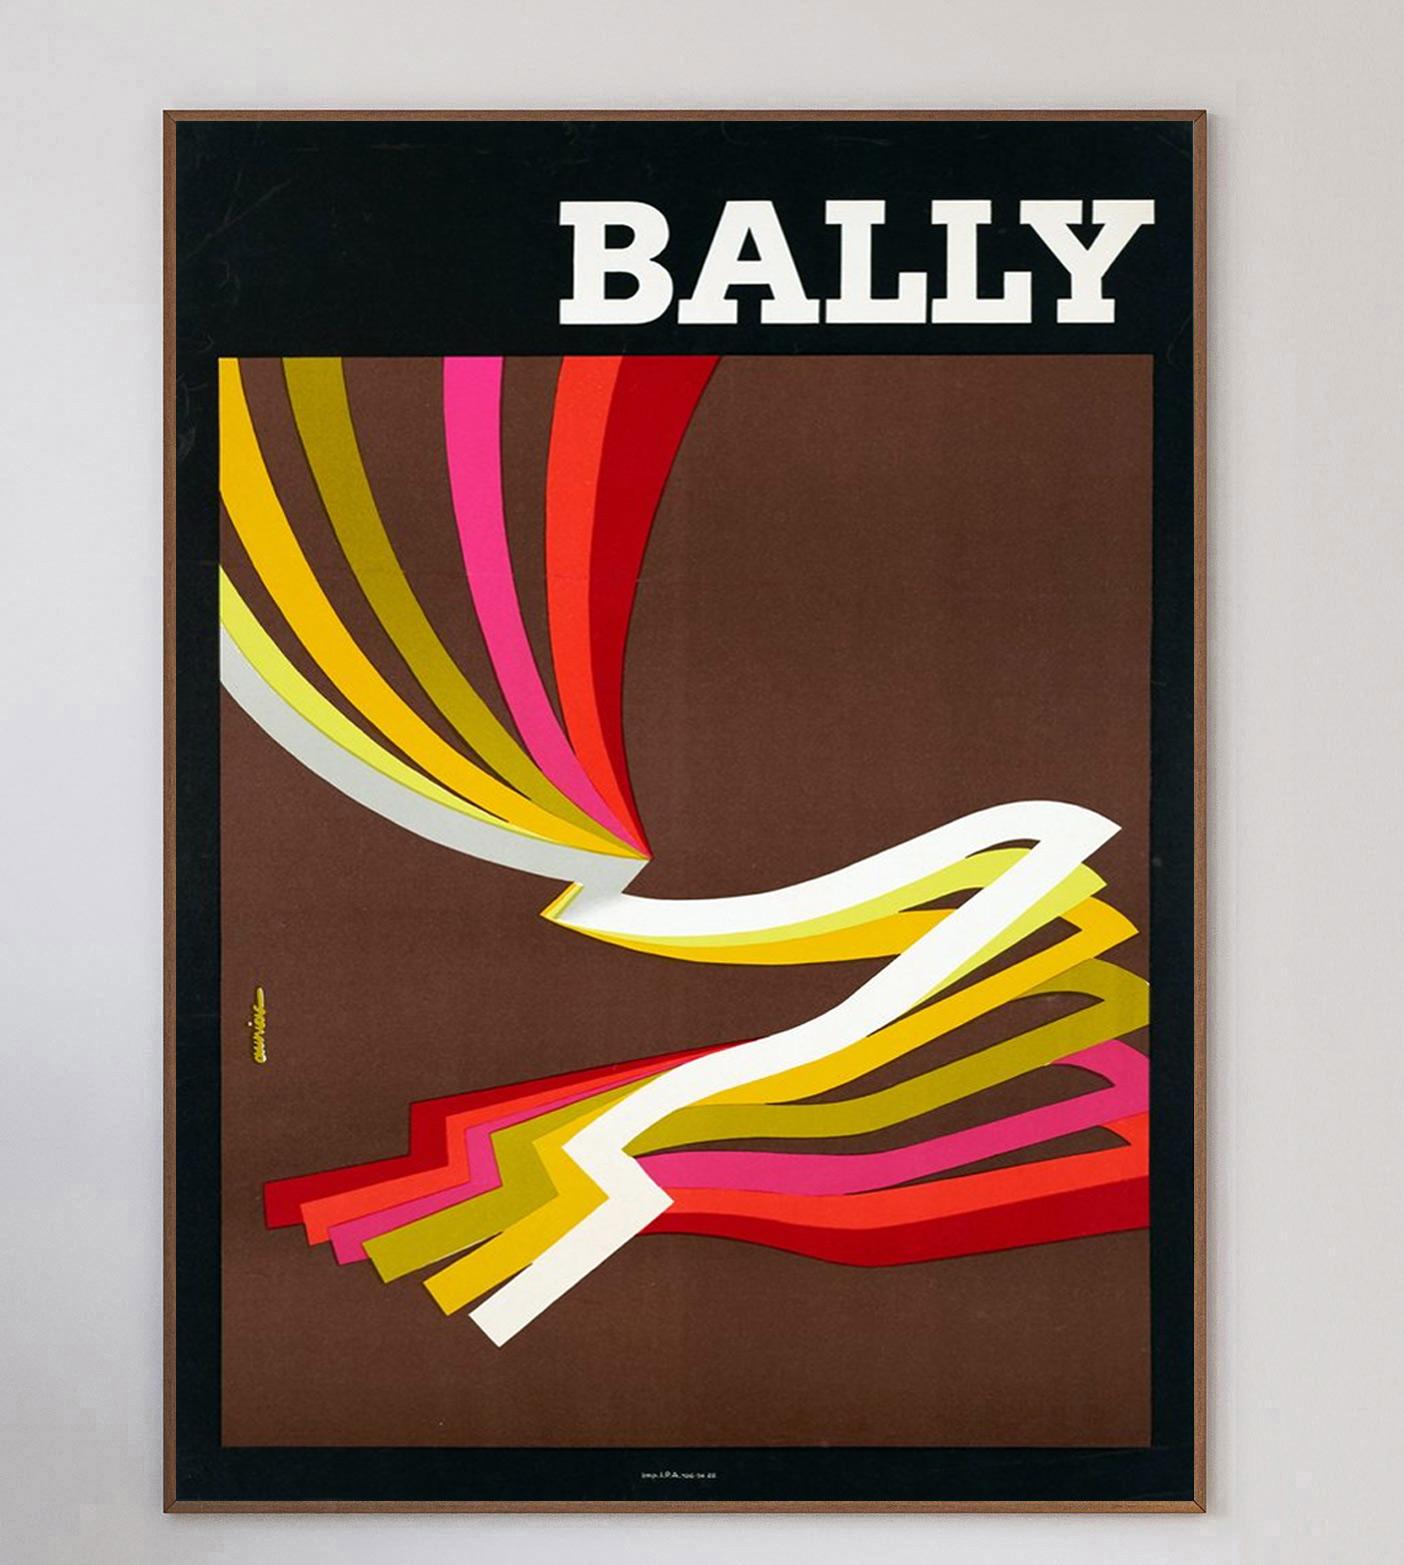 Beautifully designed poster from 1981 advertising the luxury Swiss shoe brand Bally. With artwork from French graphic designer and poster artist Jacques Auriac.

This piece known as 